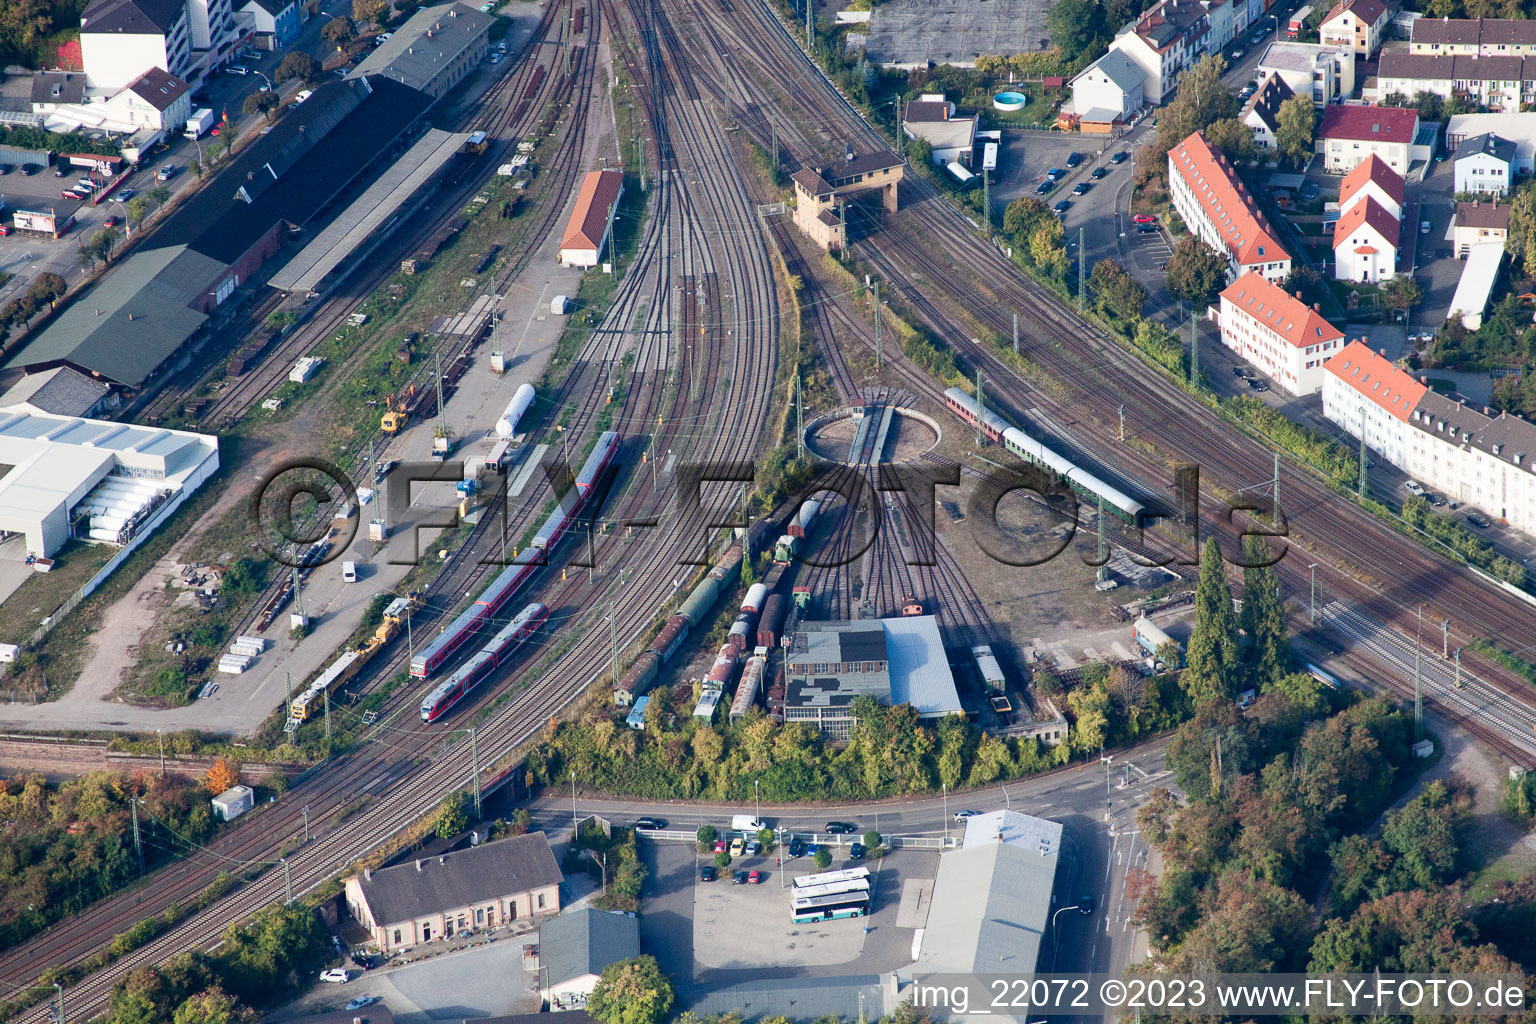 Aerial view of Track triangle in Neustadt an der Weinstraße in the state Rhineland-Palatinate, Germany